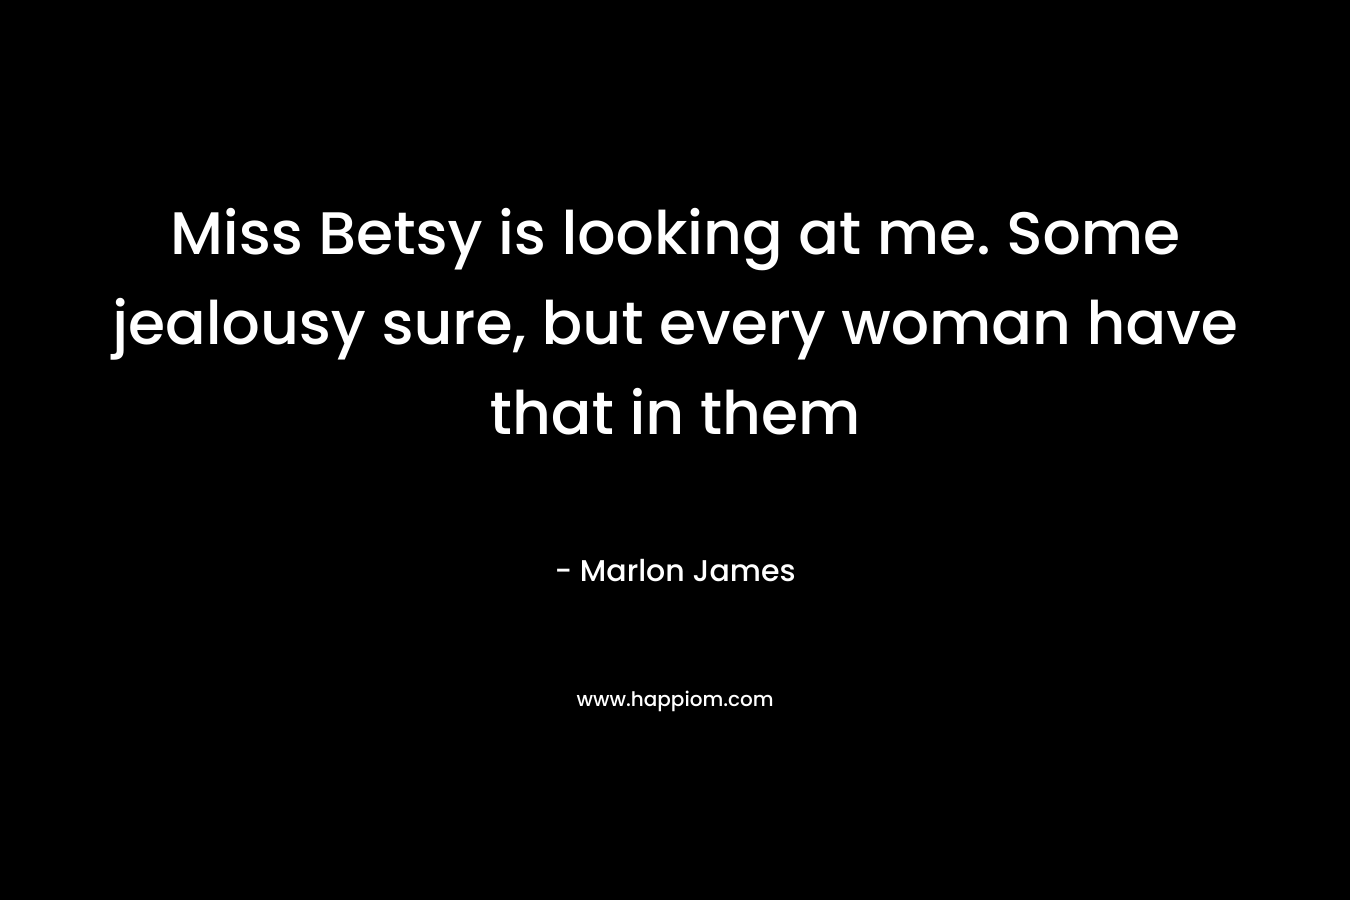 Miss Betsy is looking at me. Some jealousy sure, but every woman have that in them – Marlon James